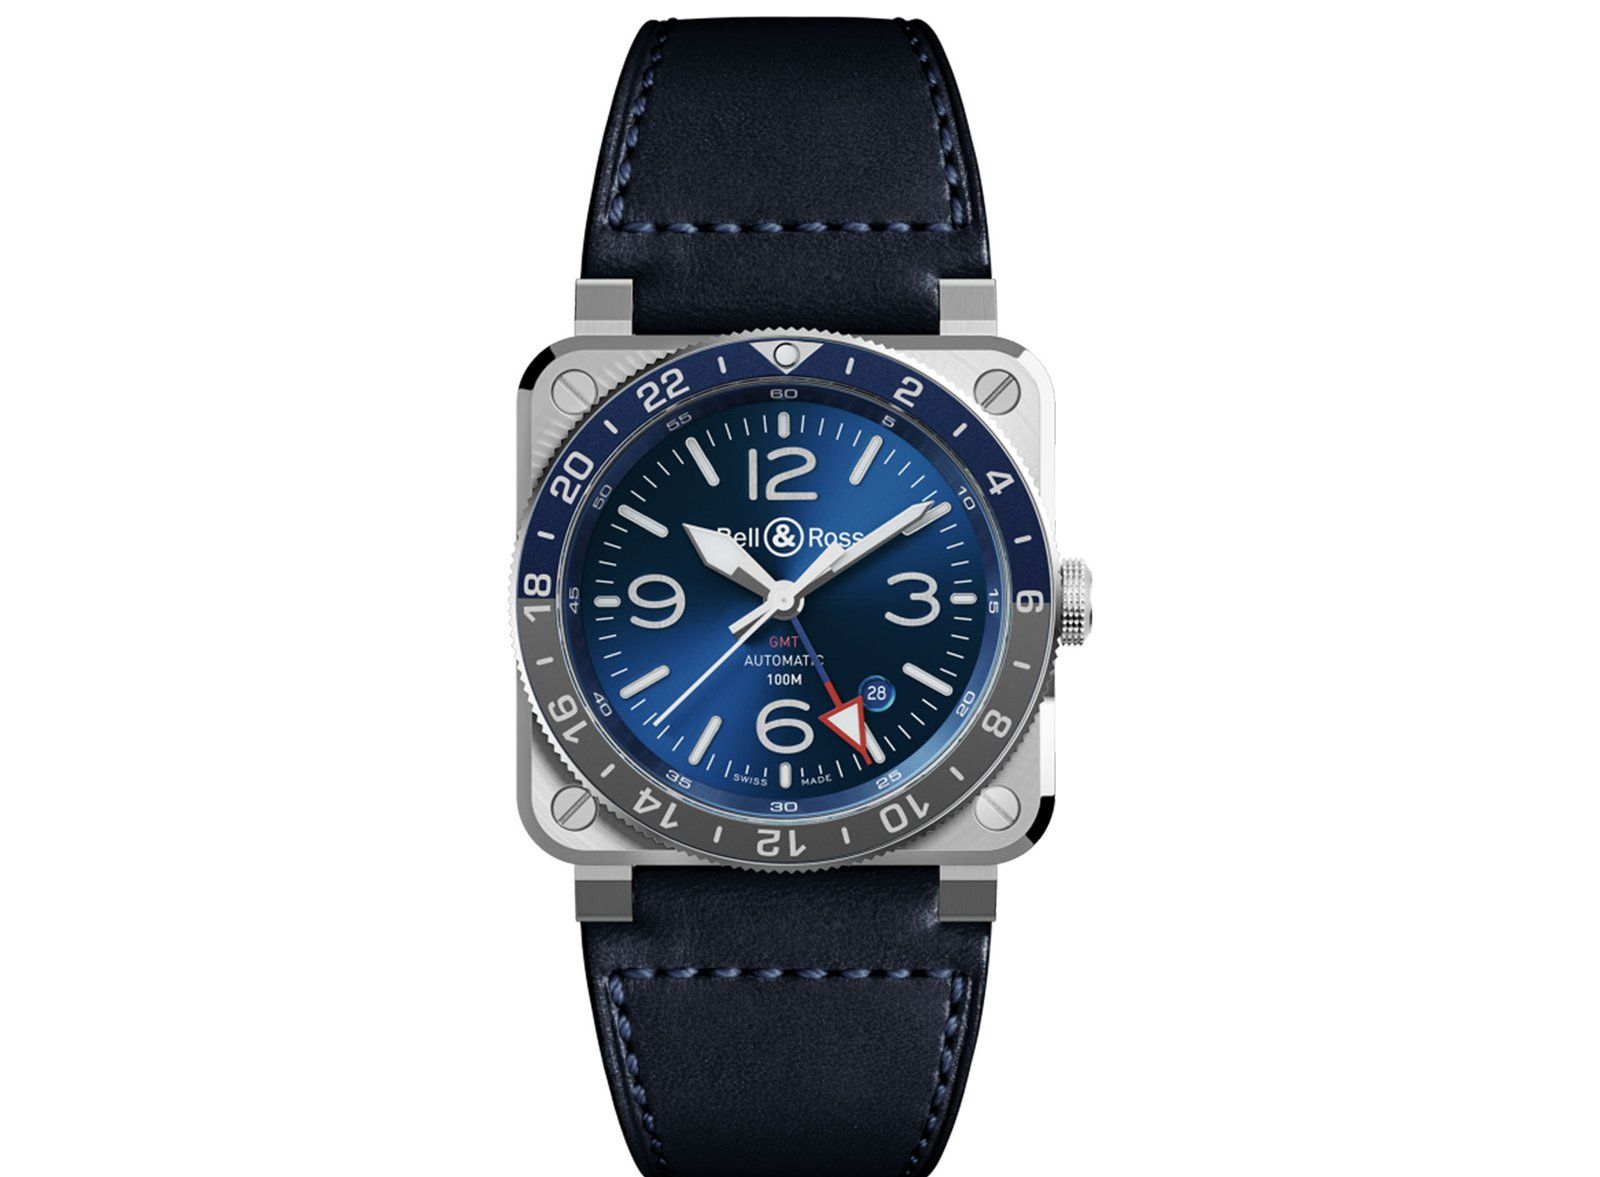 The watch allows quick setting of the GMT hand, independently of the hour